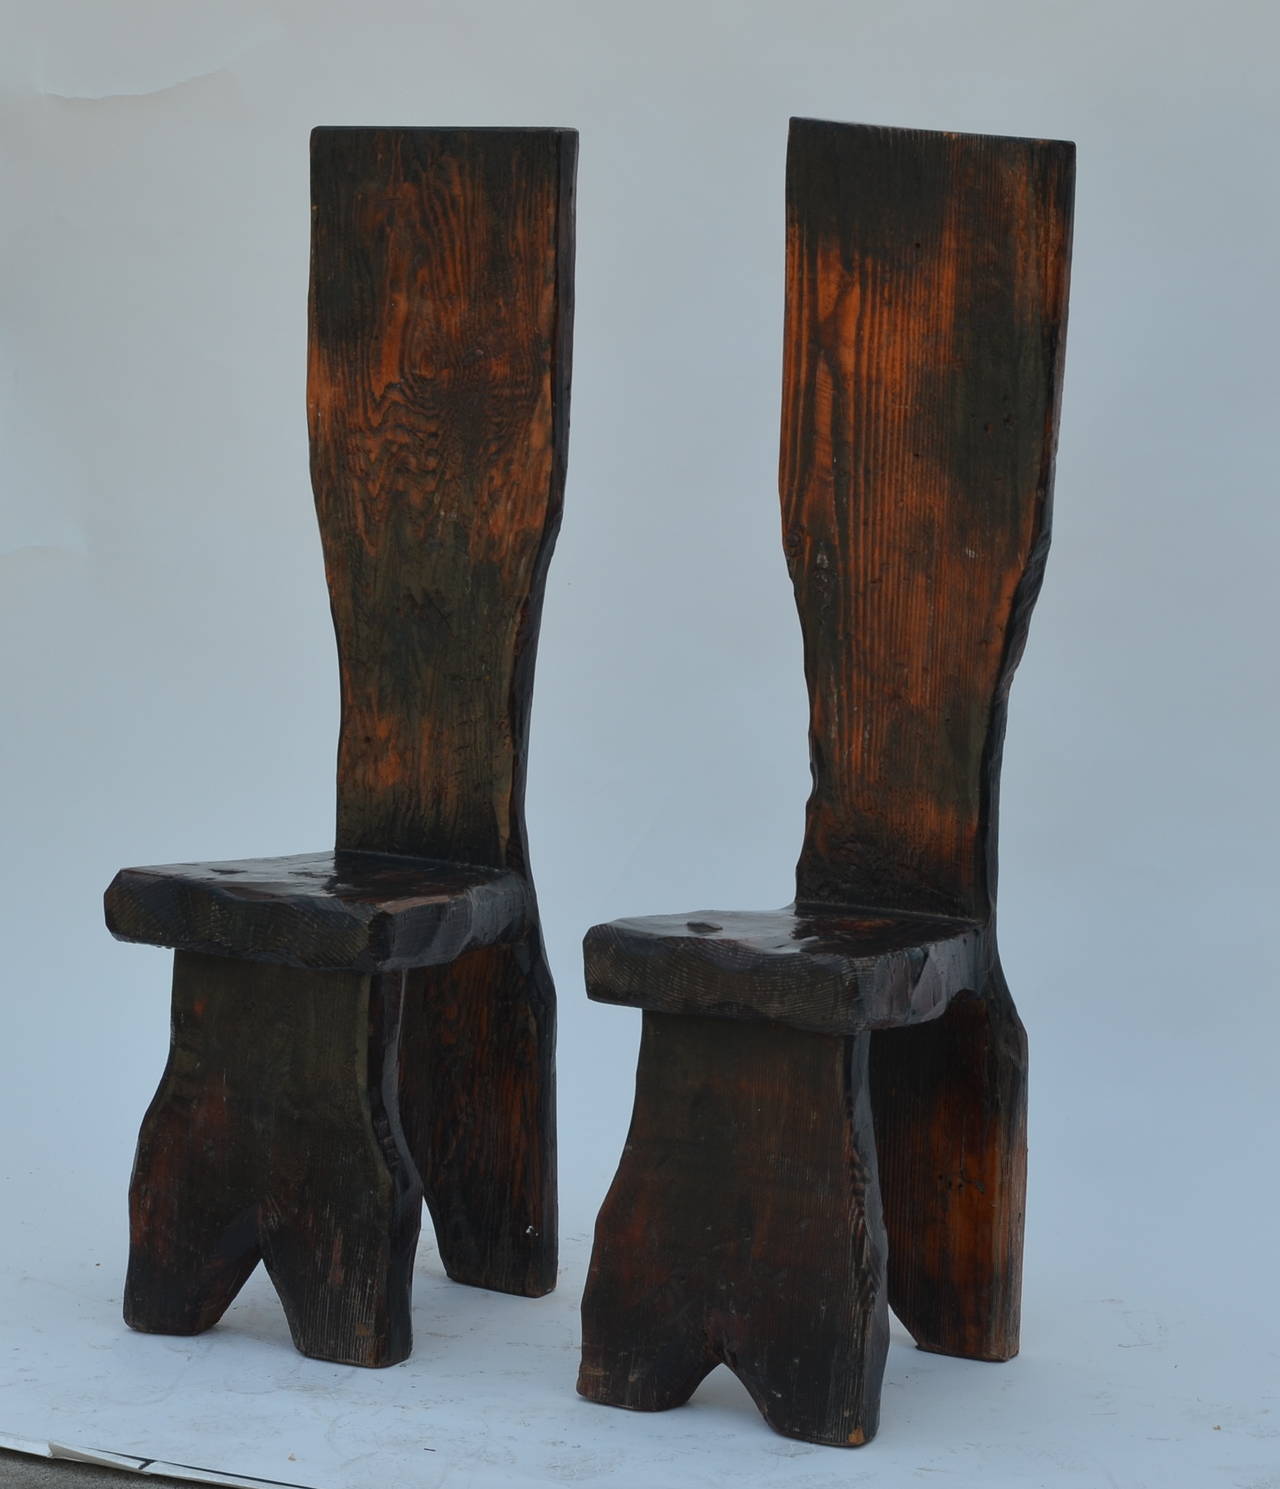 Unique pair of sculptural Oregon pine wabi side chairs. Primitive wabi-sabi look and feel, a philosophy that embraces quietude and modesty.